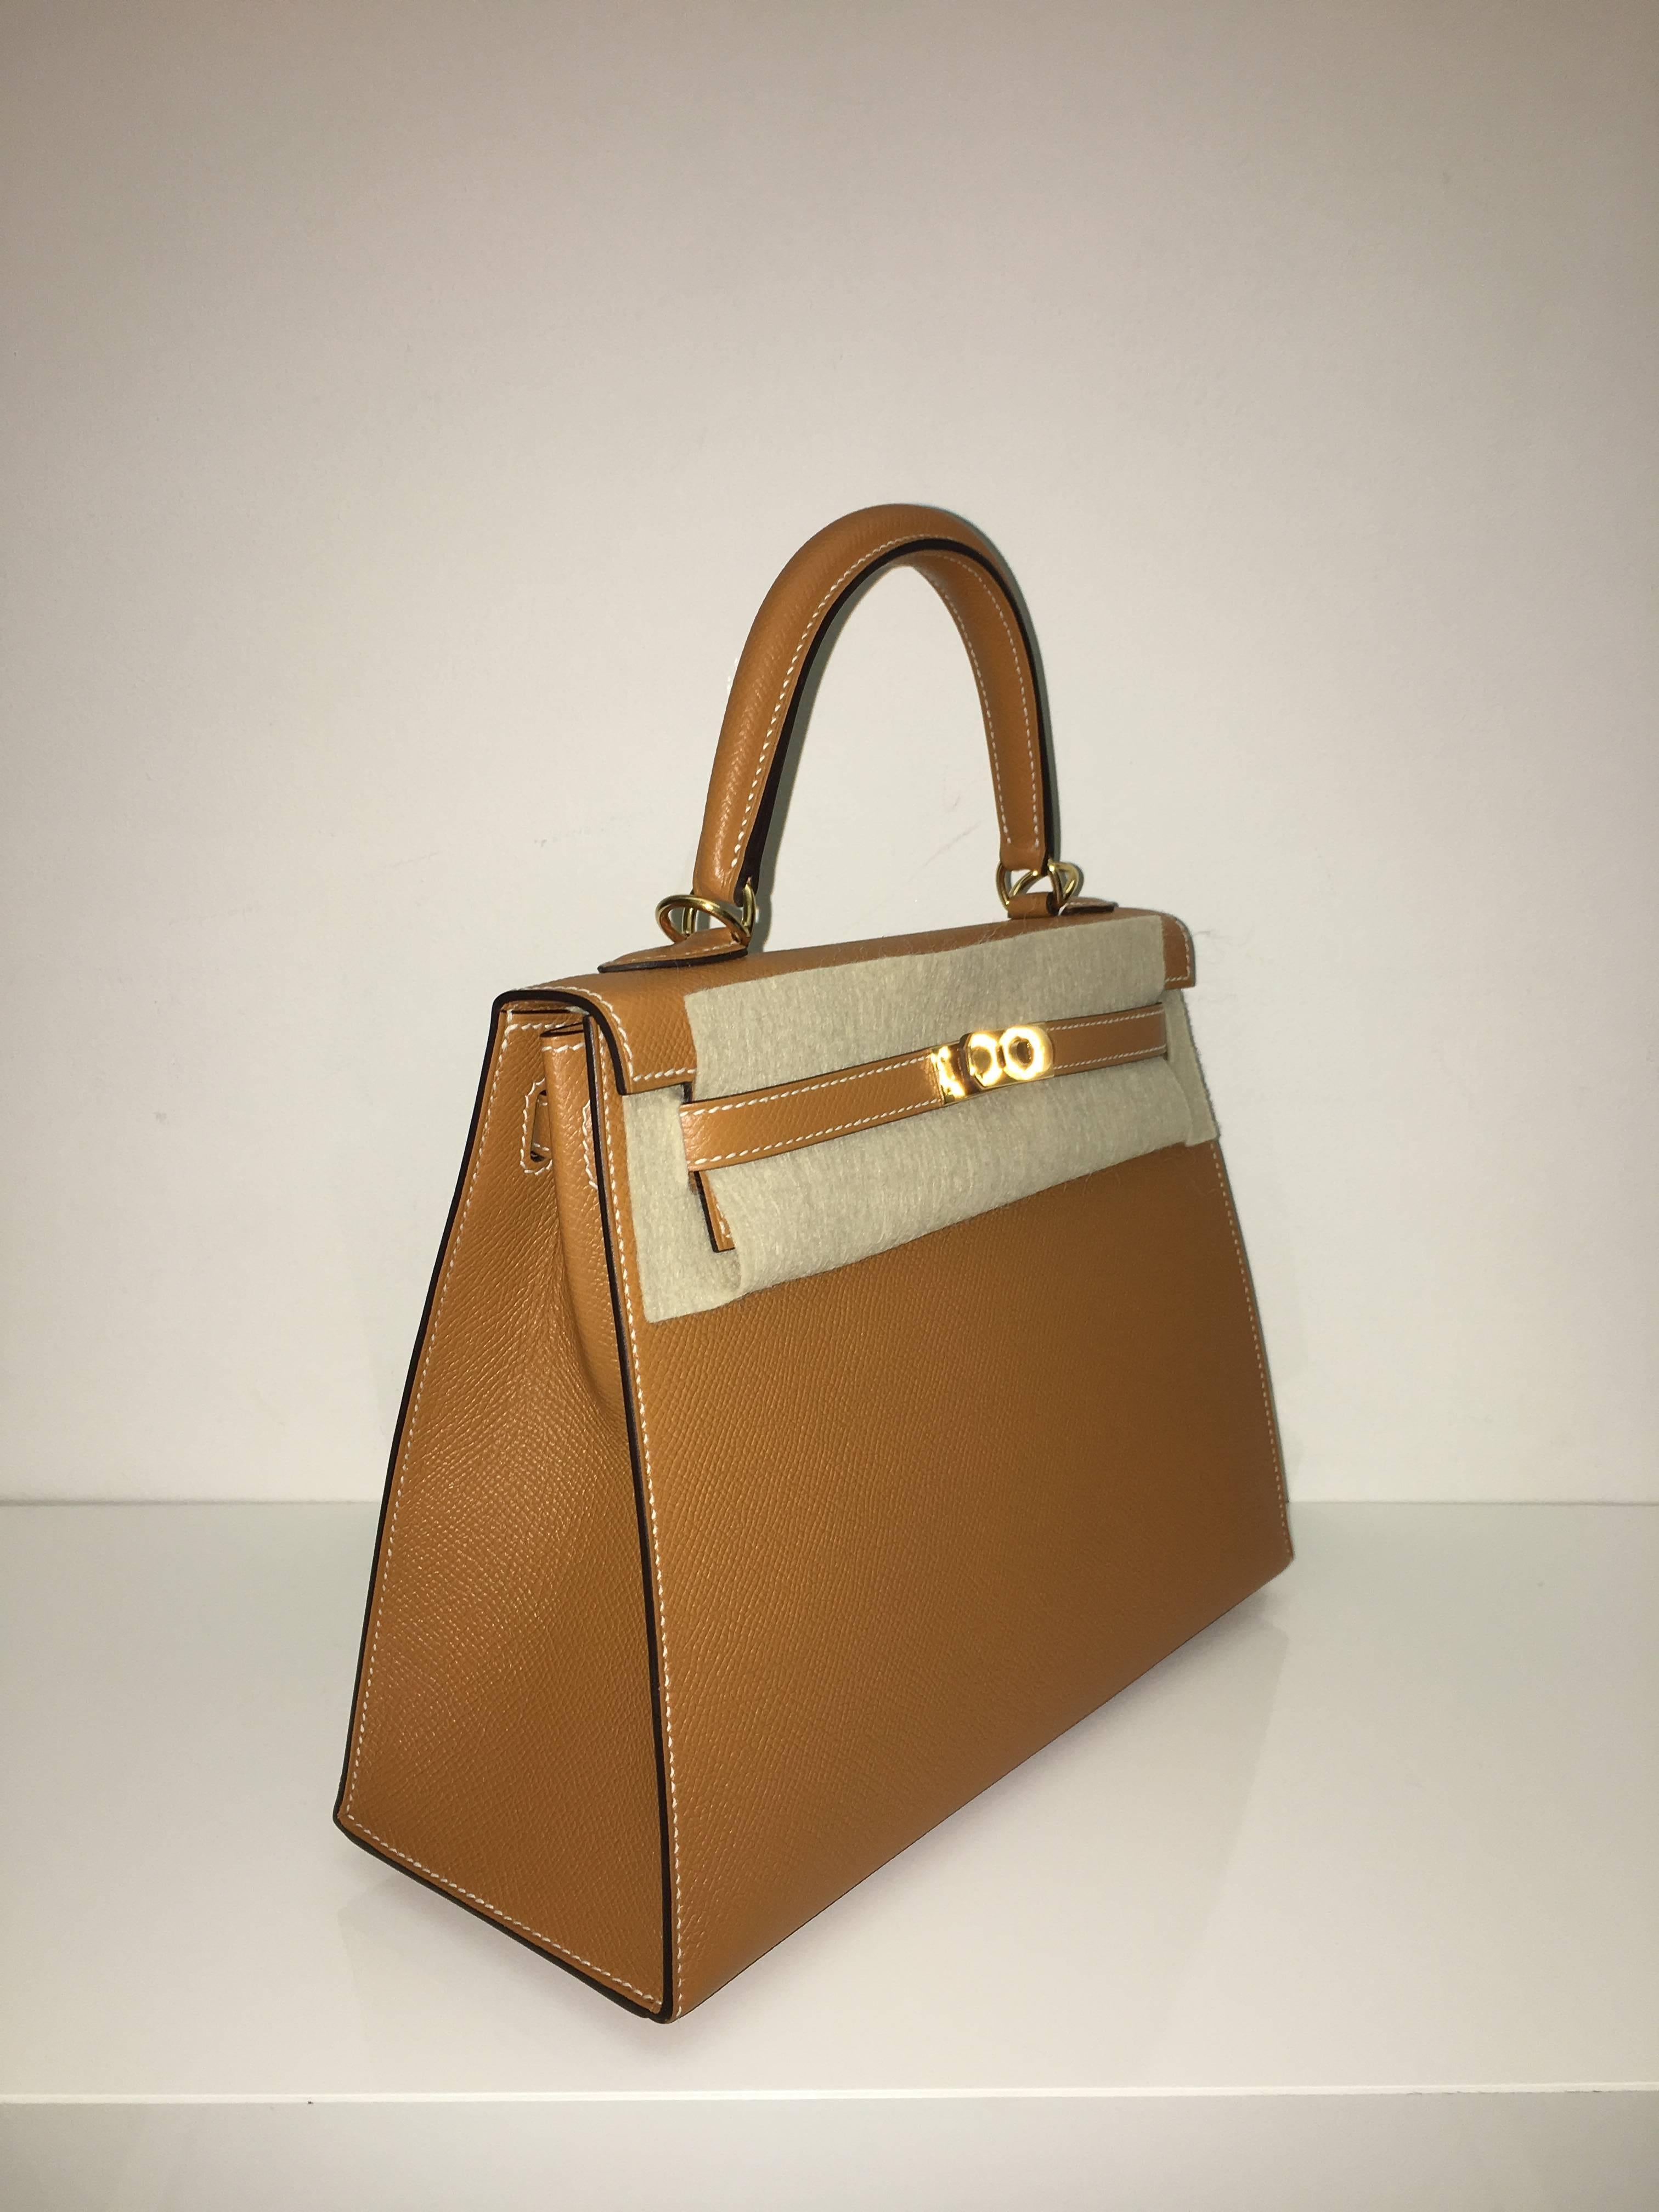 Hermes 
Kelly Size 25
Epsom Leather 
Colour Toffee
Gold Hardware 
store fresh, comes with receipt and full set (dust bag, box...) 
Hydeparkfashion specializes in sourcing and delivering authentic luxury handbags, mainly Hermes, to client